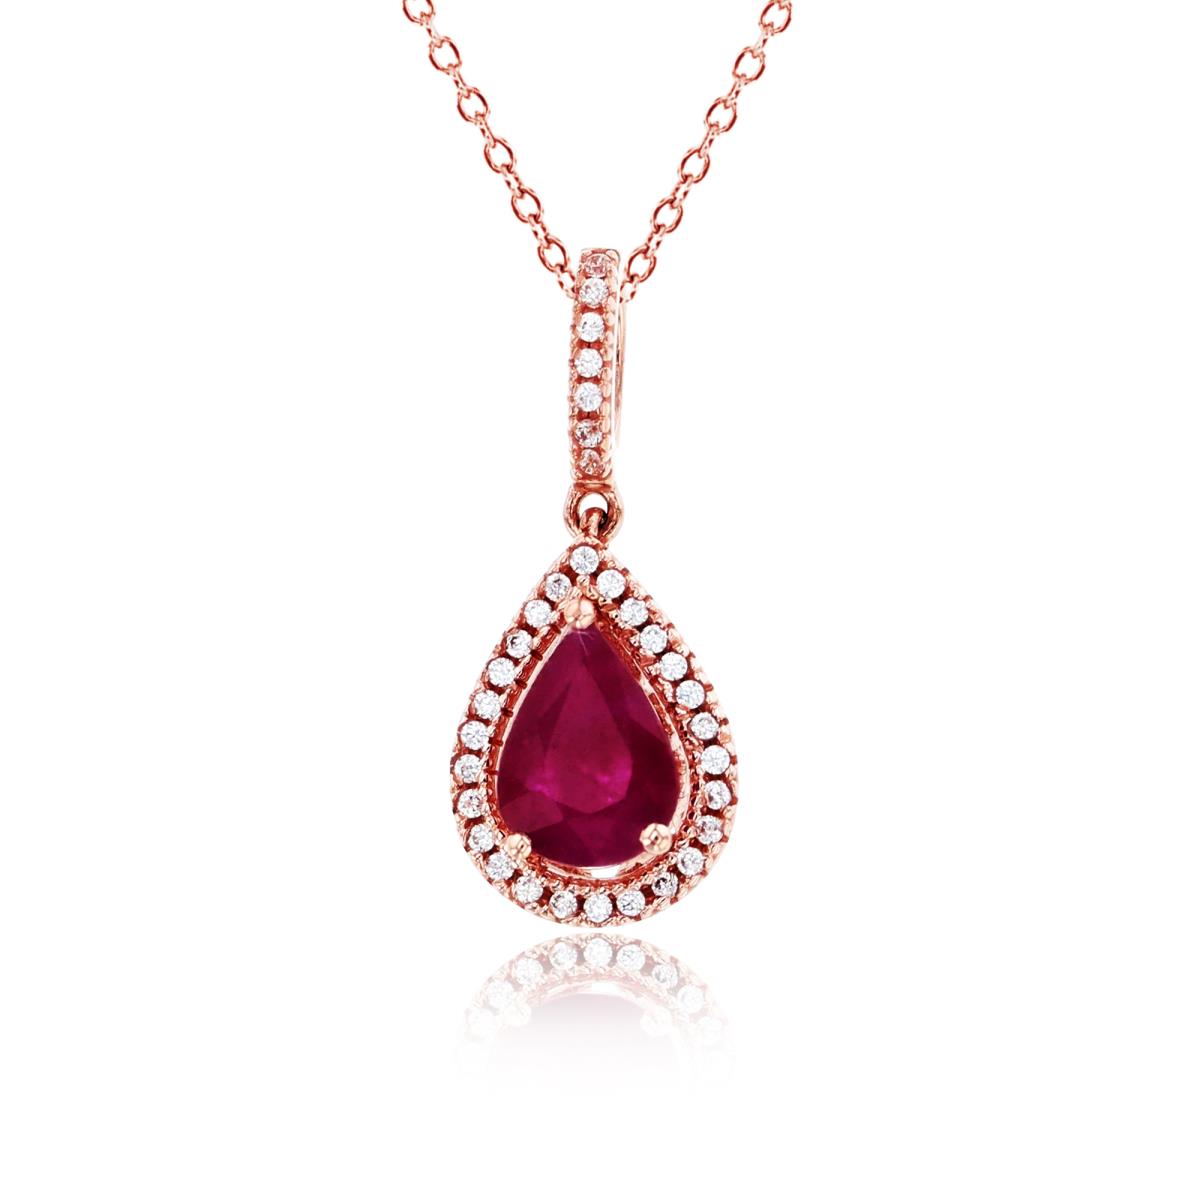 10K Rose Gold 0.10 CTTW Rnd Diamonds & 7x5mm PS Glass Field Ruby Halo 18"Necklace